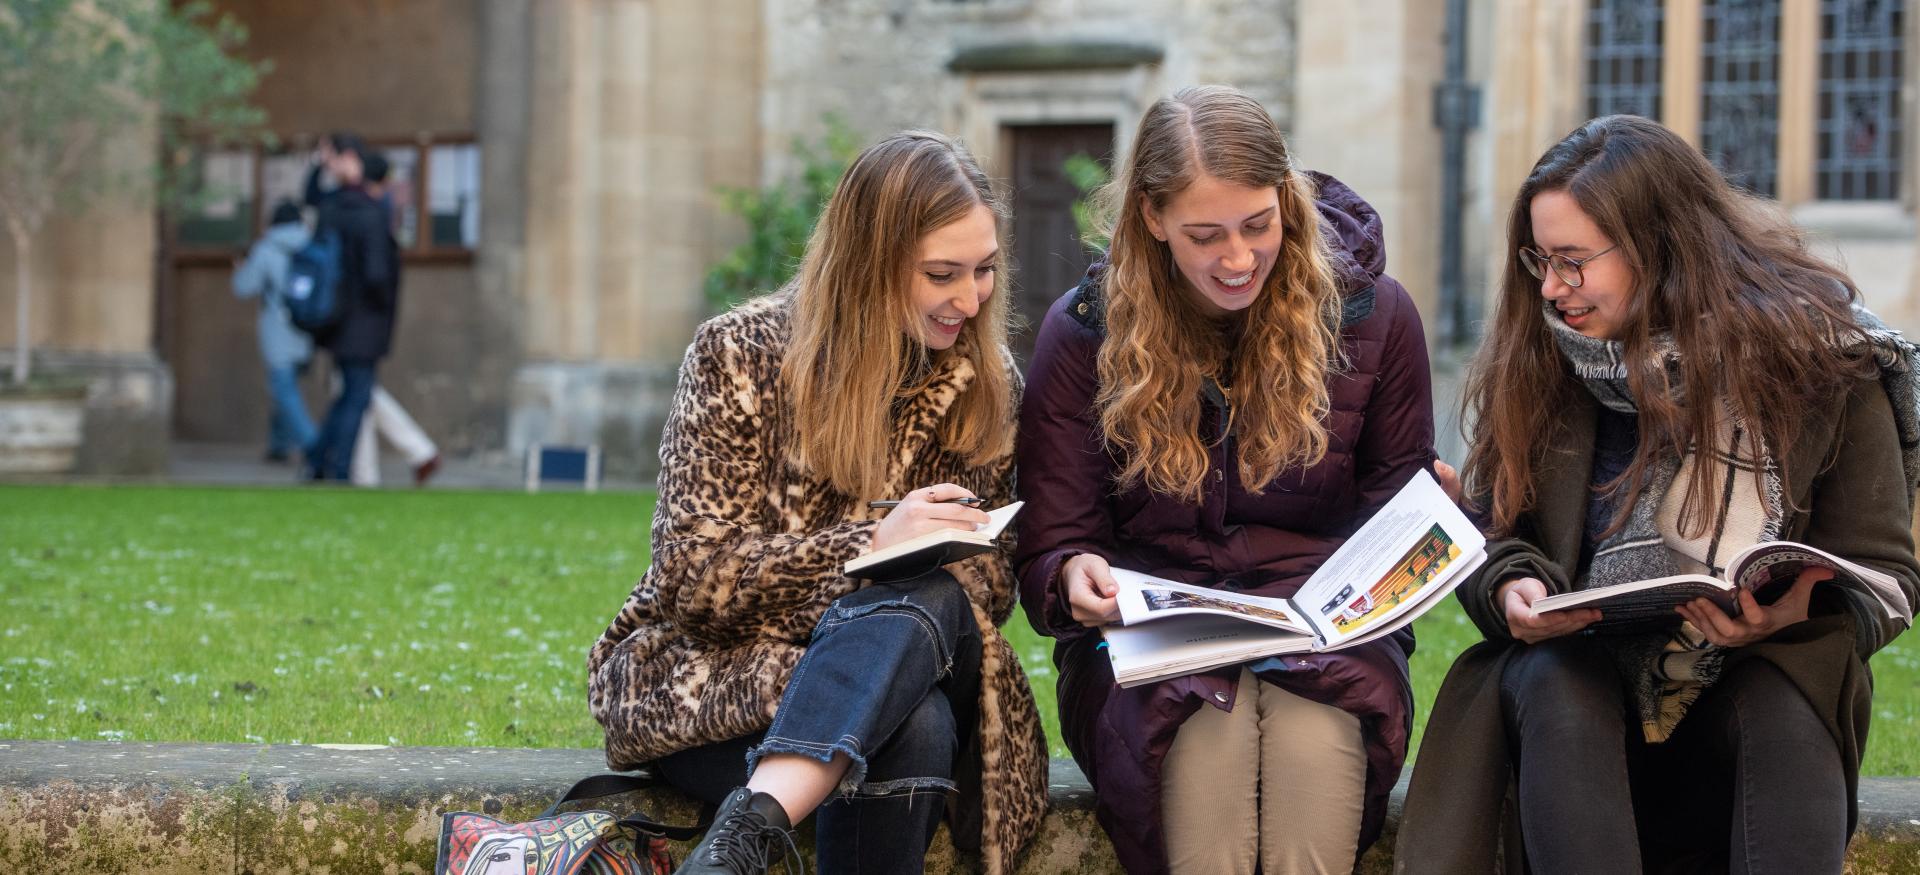 Three female Trinity college postgraduate students sit consulting books in one of the college quads.